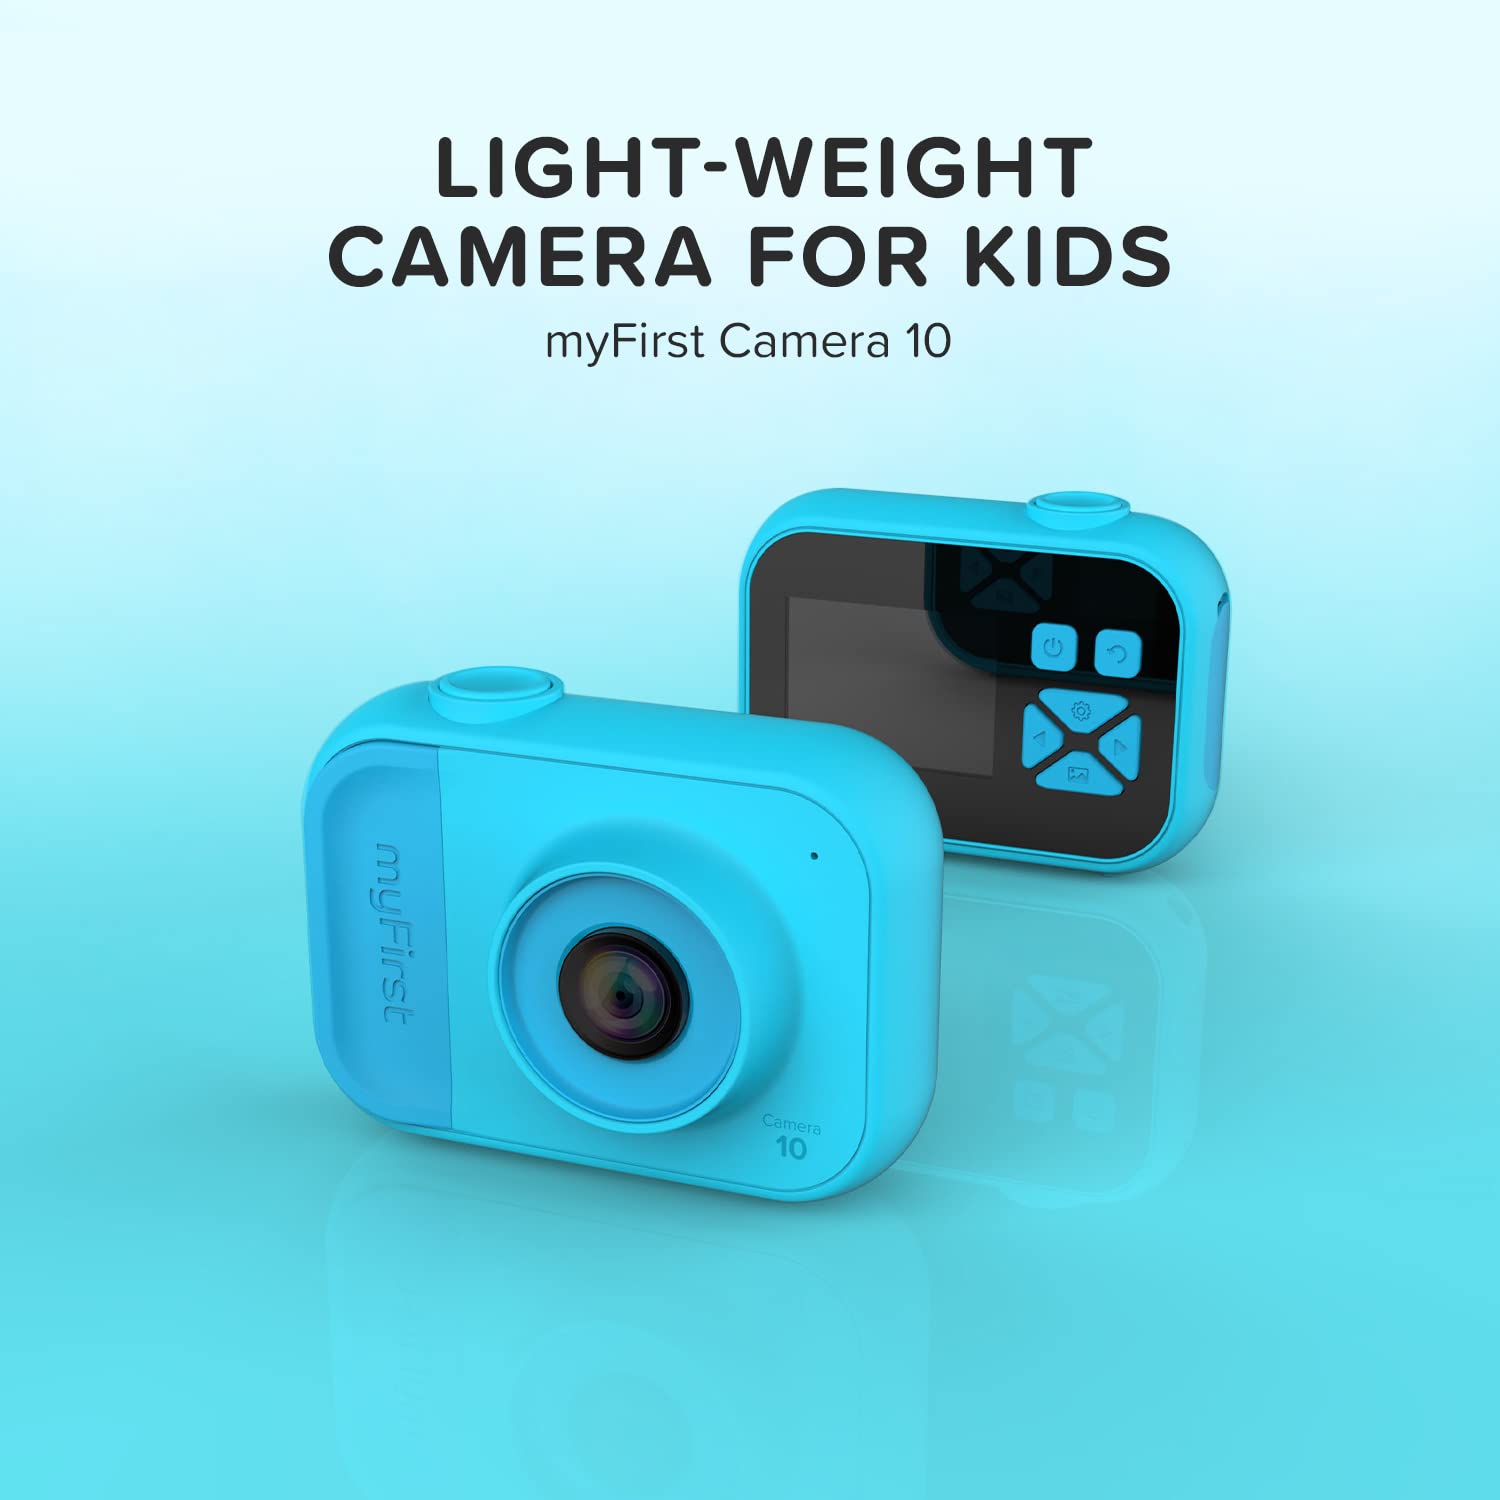 myFirst Camera 10 - Digital Camera for Boys Girls Age 4-9 5MP Video Photo 32GB with Tripod Screw Adapter Suitable for Birthday Gift (Blue)